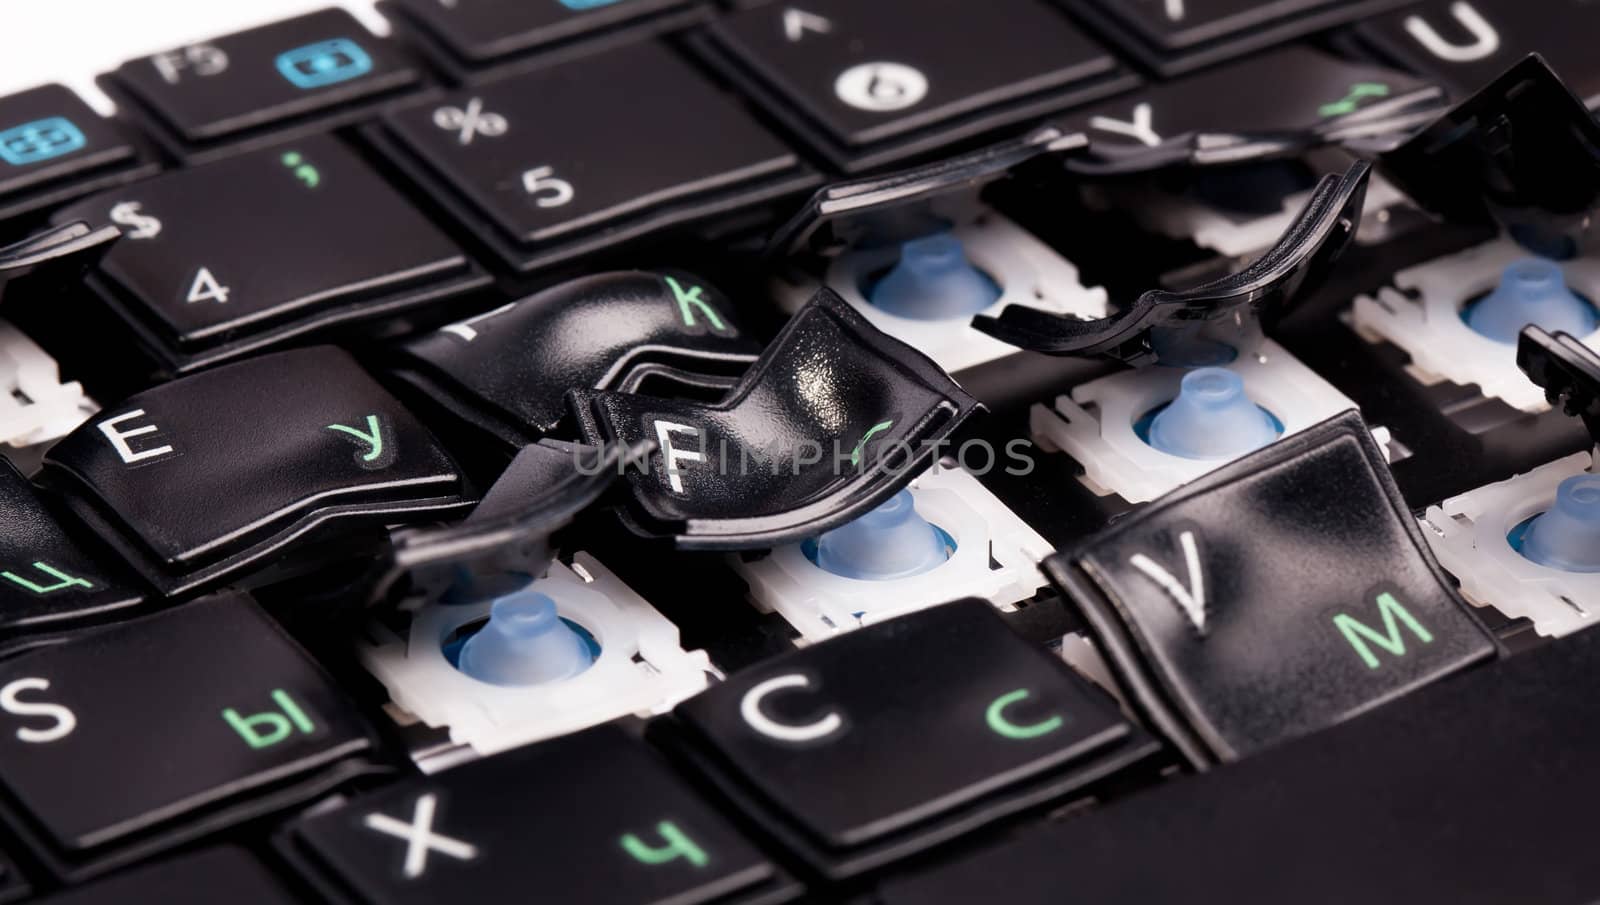 Laptop keyboard with distorted keys by RawGroup